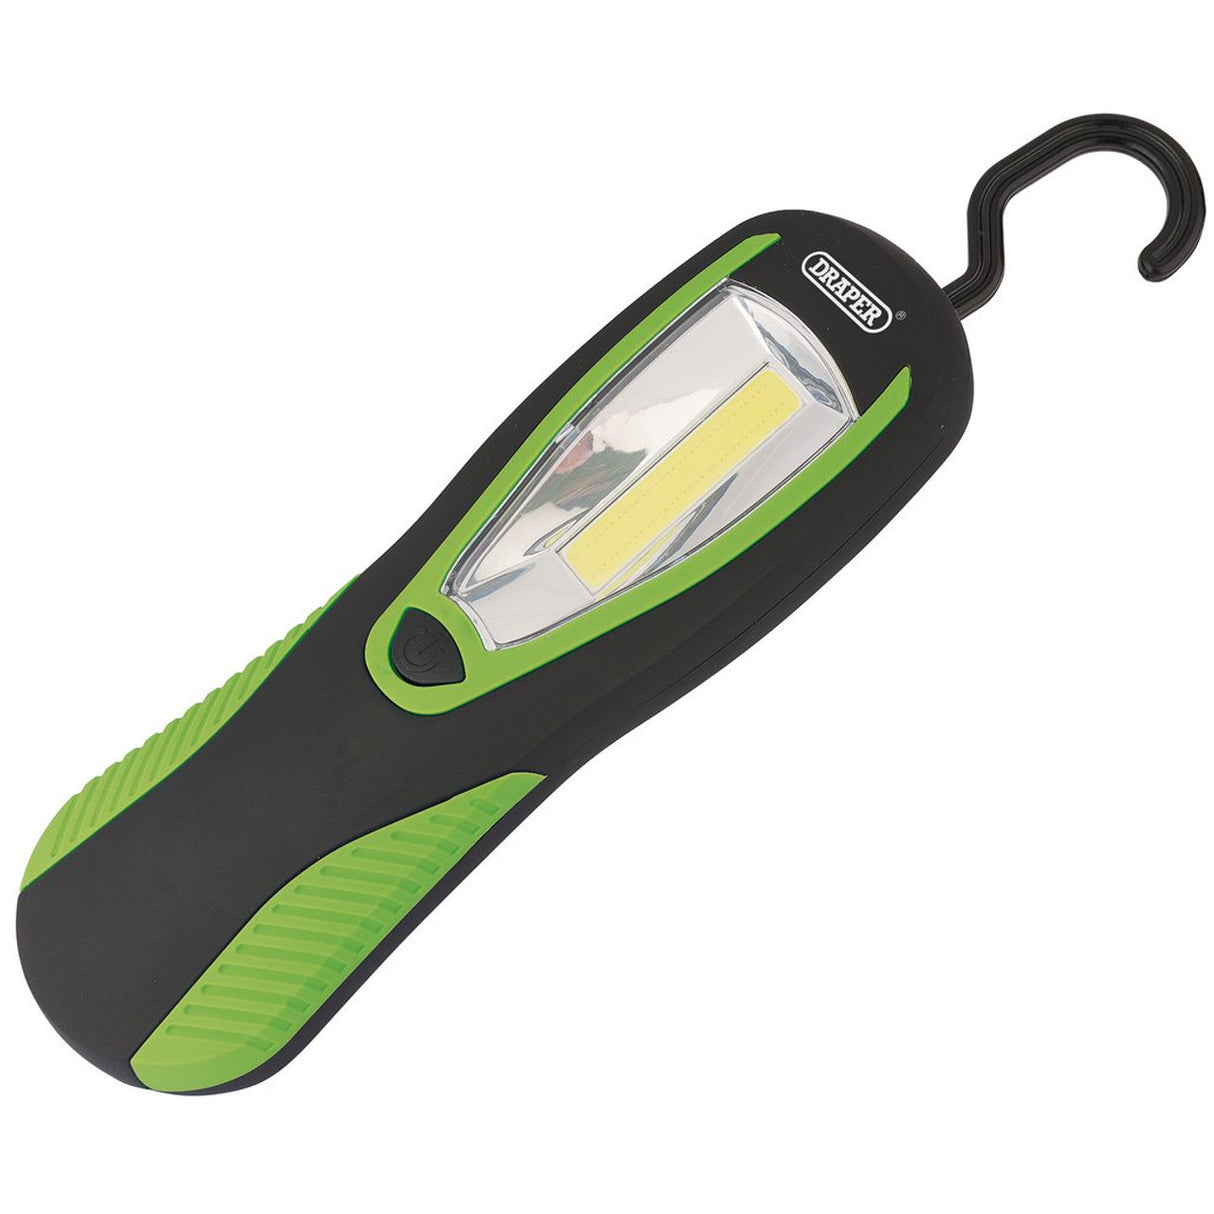 Draper Tools Cob Led Work Light With Magnetic Back And Hanging Hook, 3W, 200 Lumens, Green, 3 x Aa Batteries Supplied